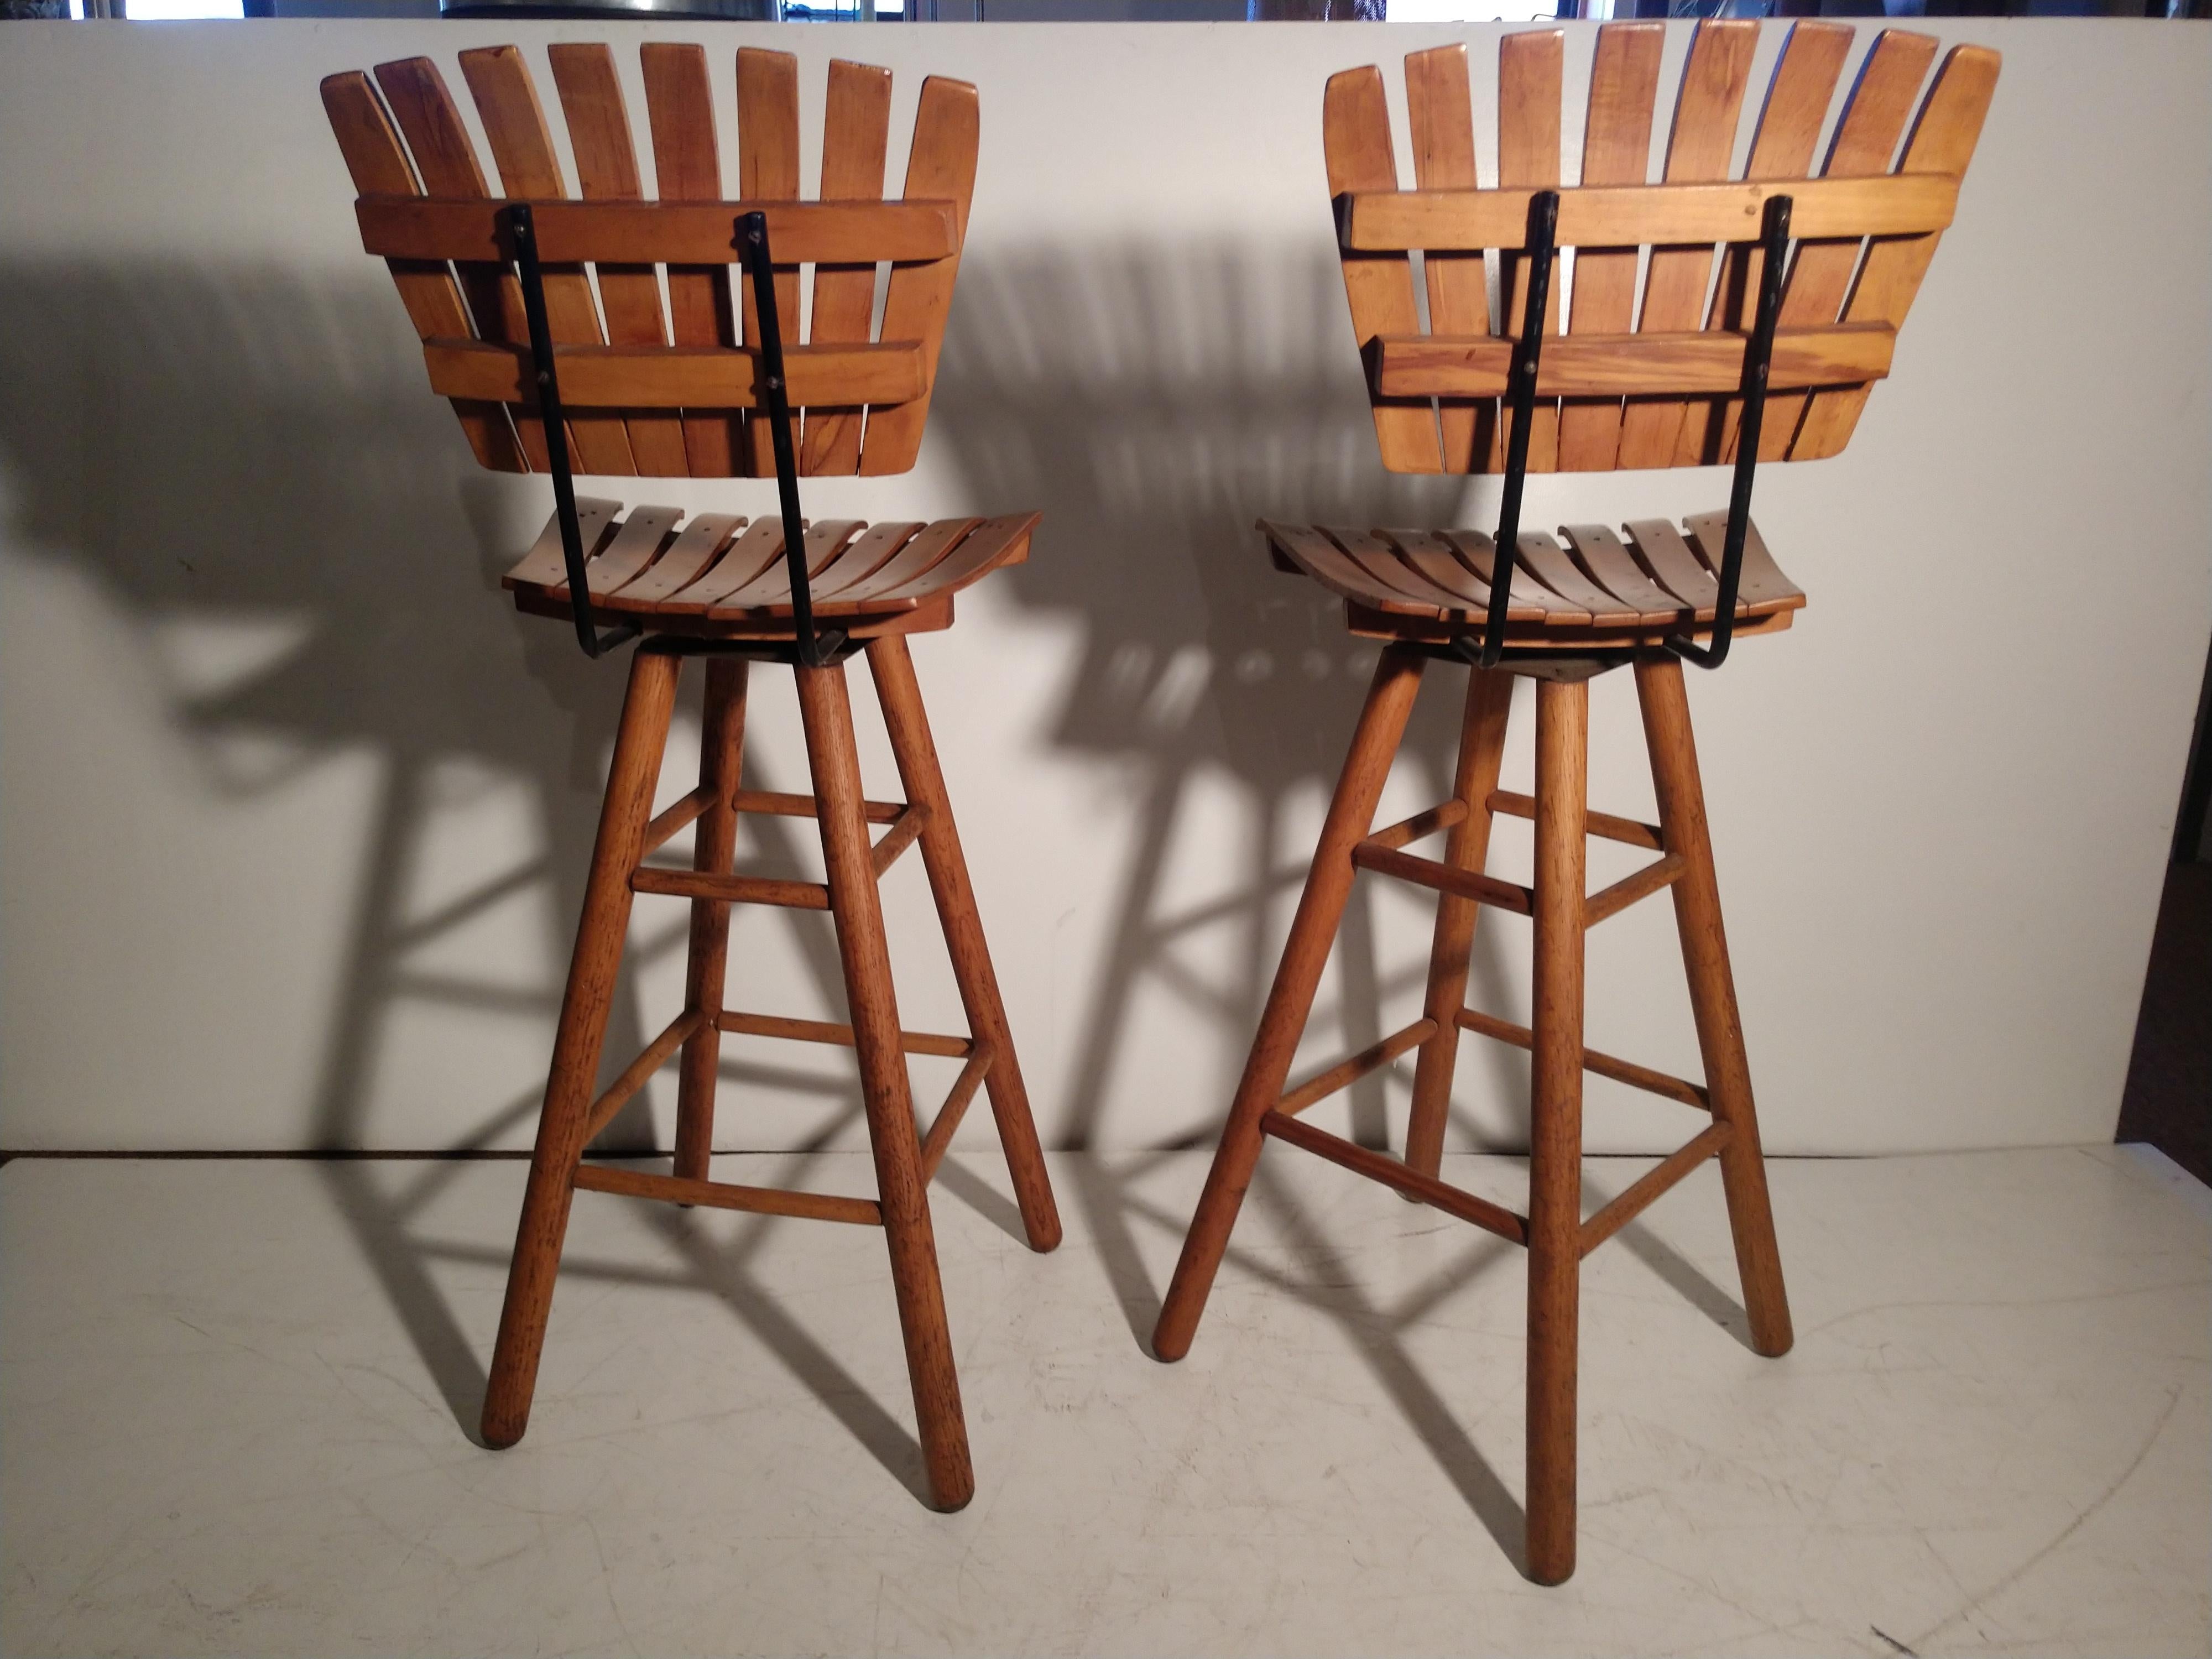 Lacquered 2 Pairs of Mid-Century Modern Slatted Wood Bar or Counter Stools Arthur Umanoff